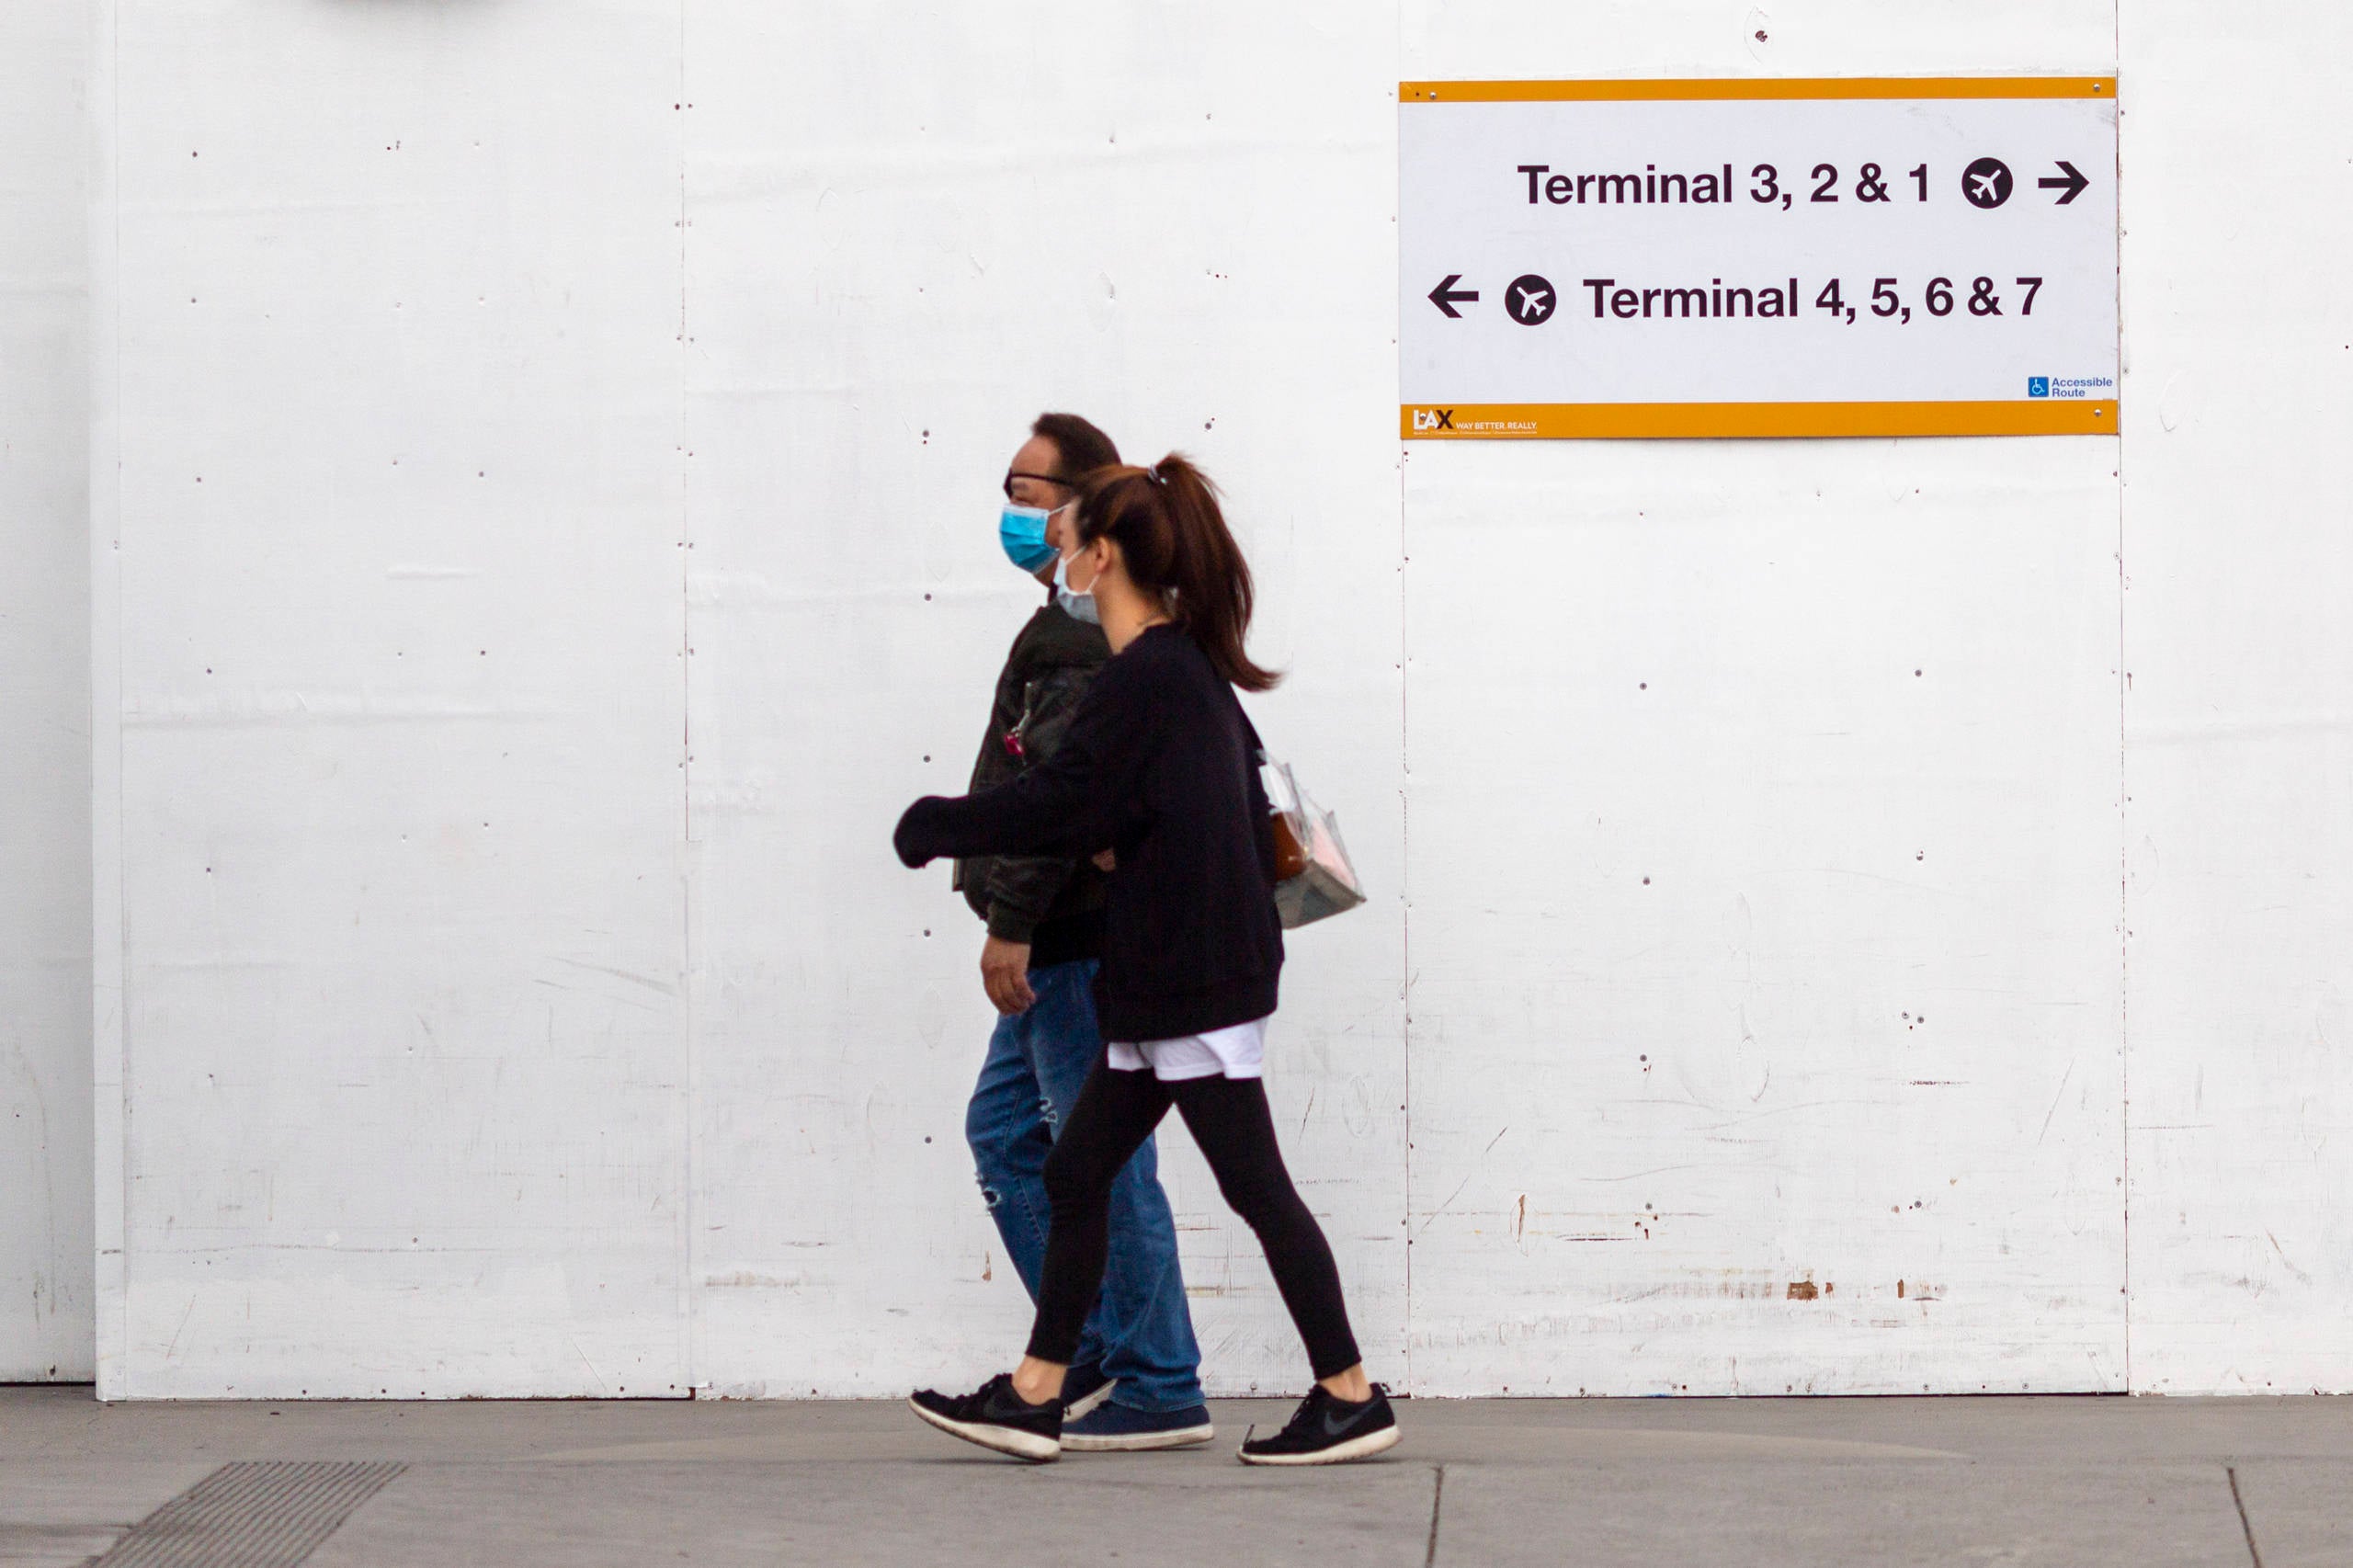 Flying after coronavirus: health screenings in airports and emptier planes